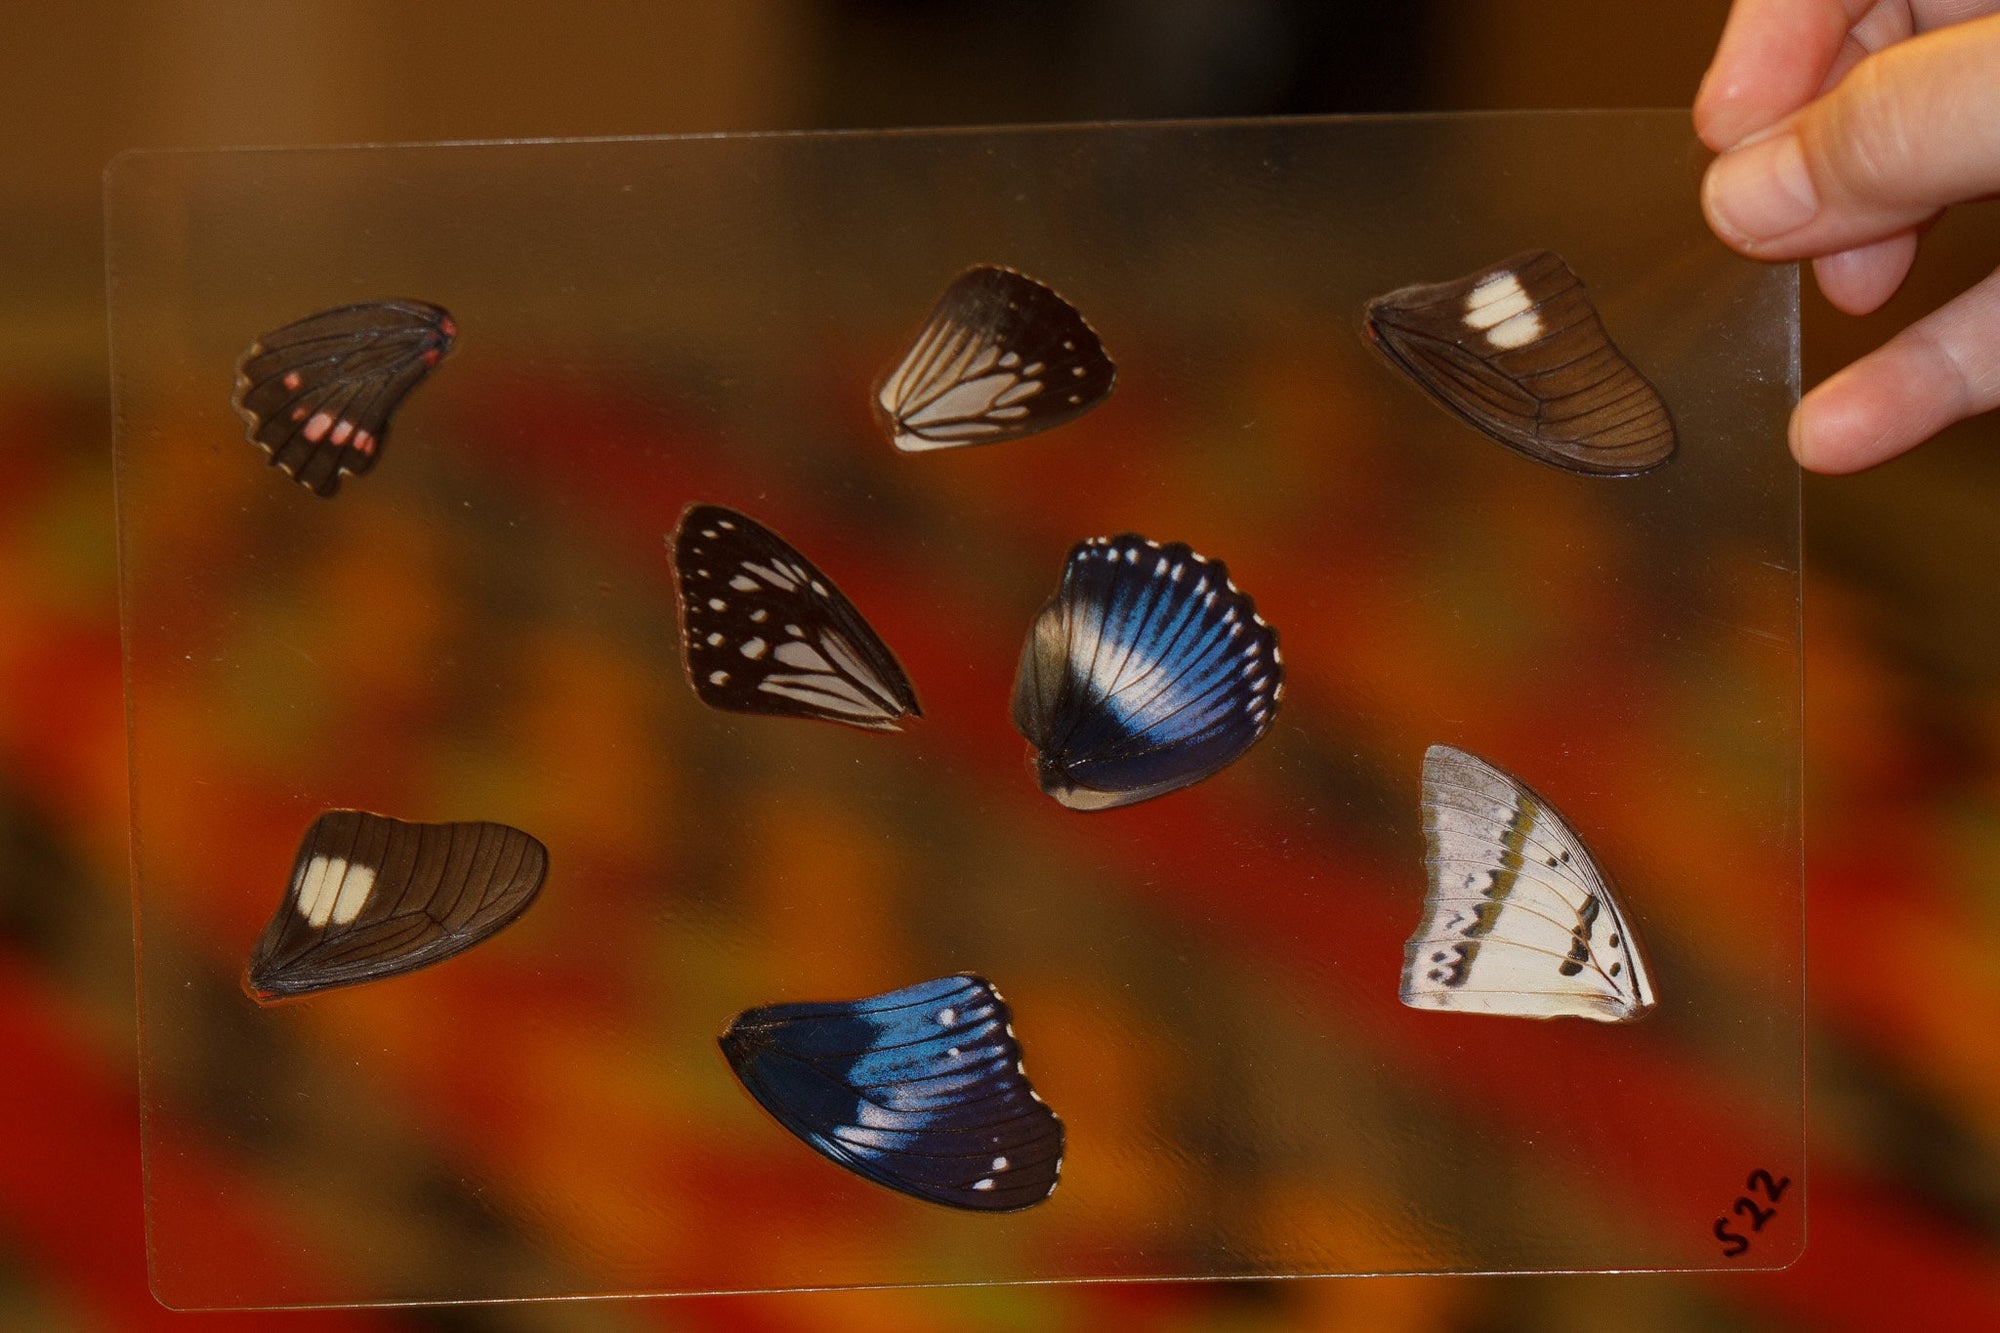 Butterfly Wings GLOSSY LAMINATED SHEET Real Ethically Sourced Specimens Moths Butterflies Wings for Art -- S22